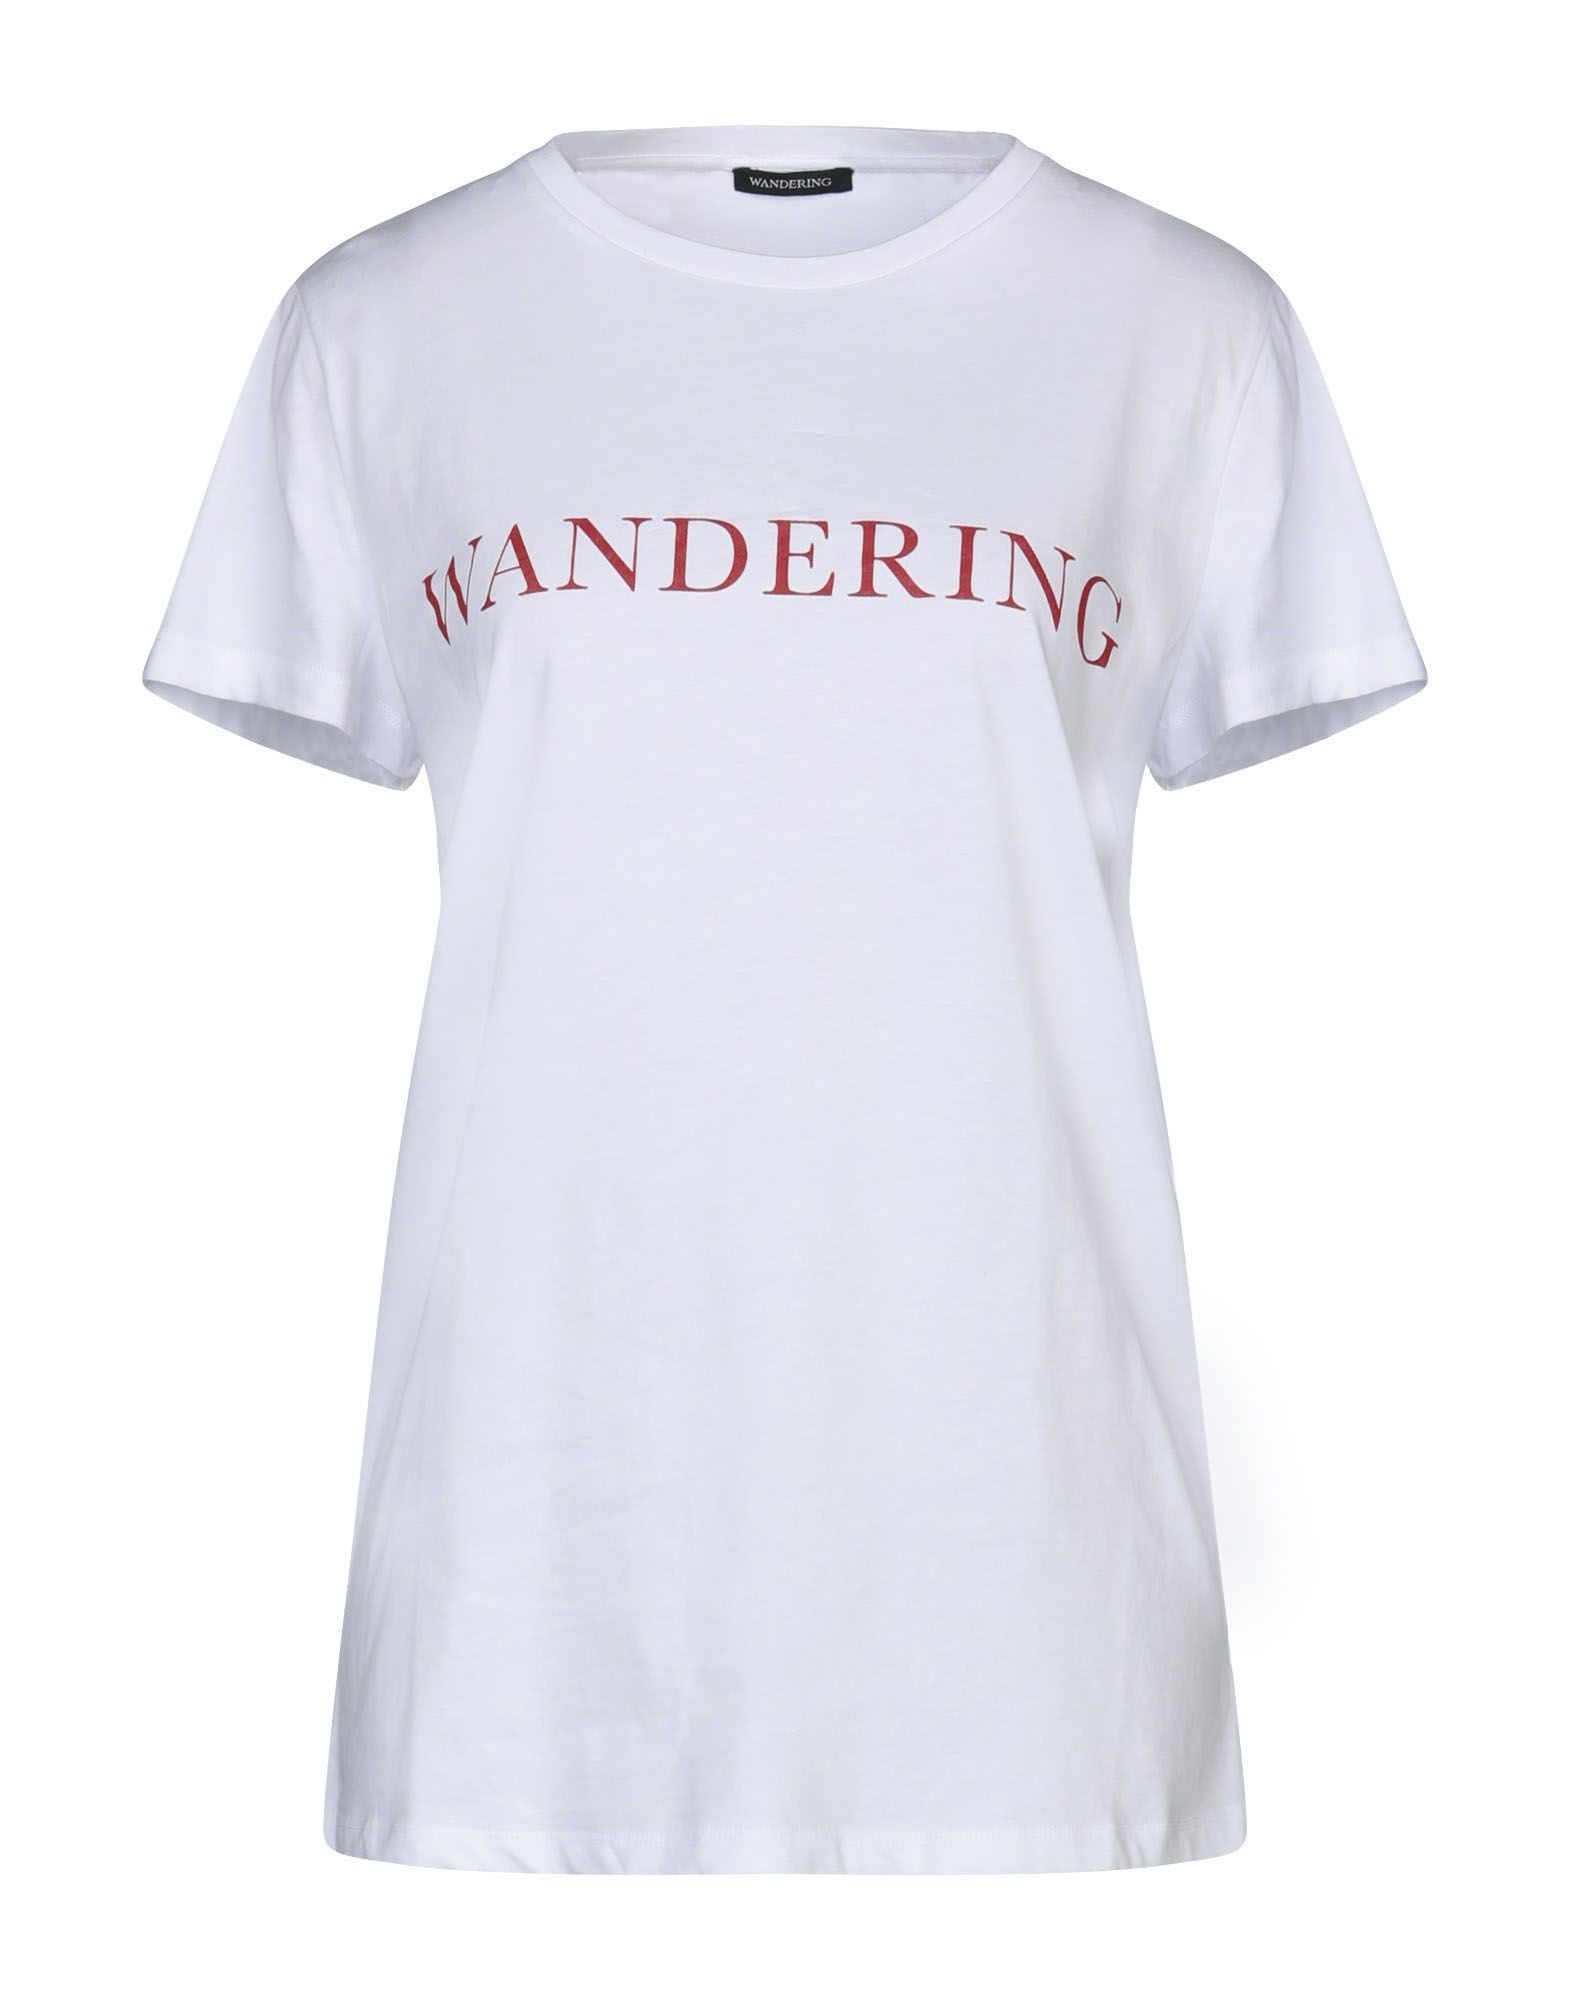 WANDERING WANDERING T-shirts from yoox.com | Daily Mail